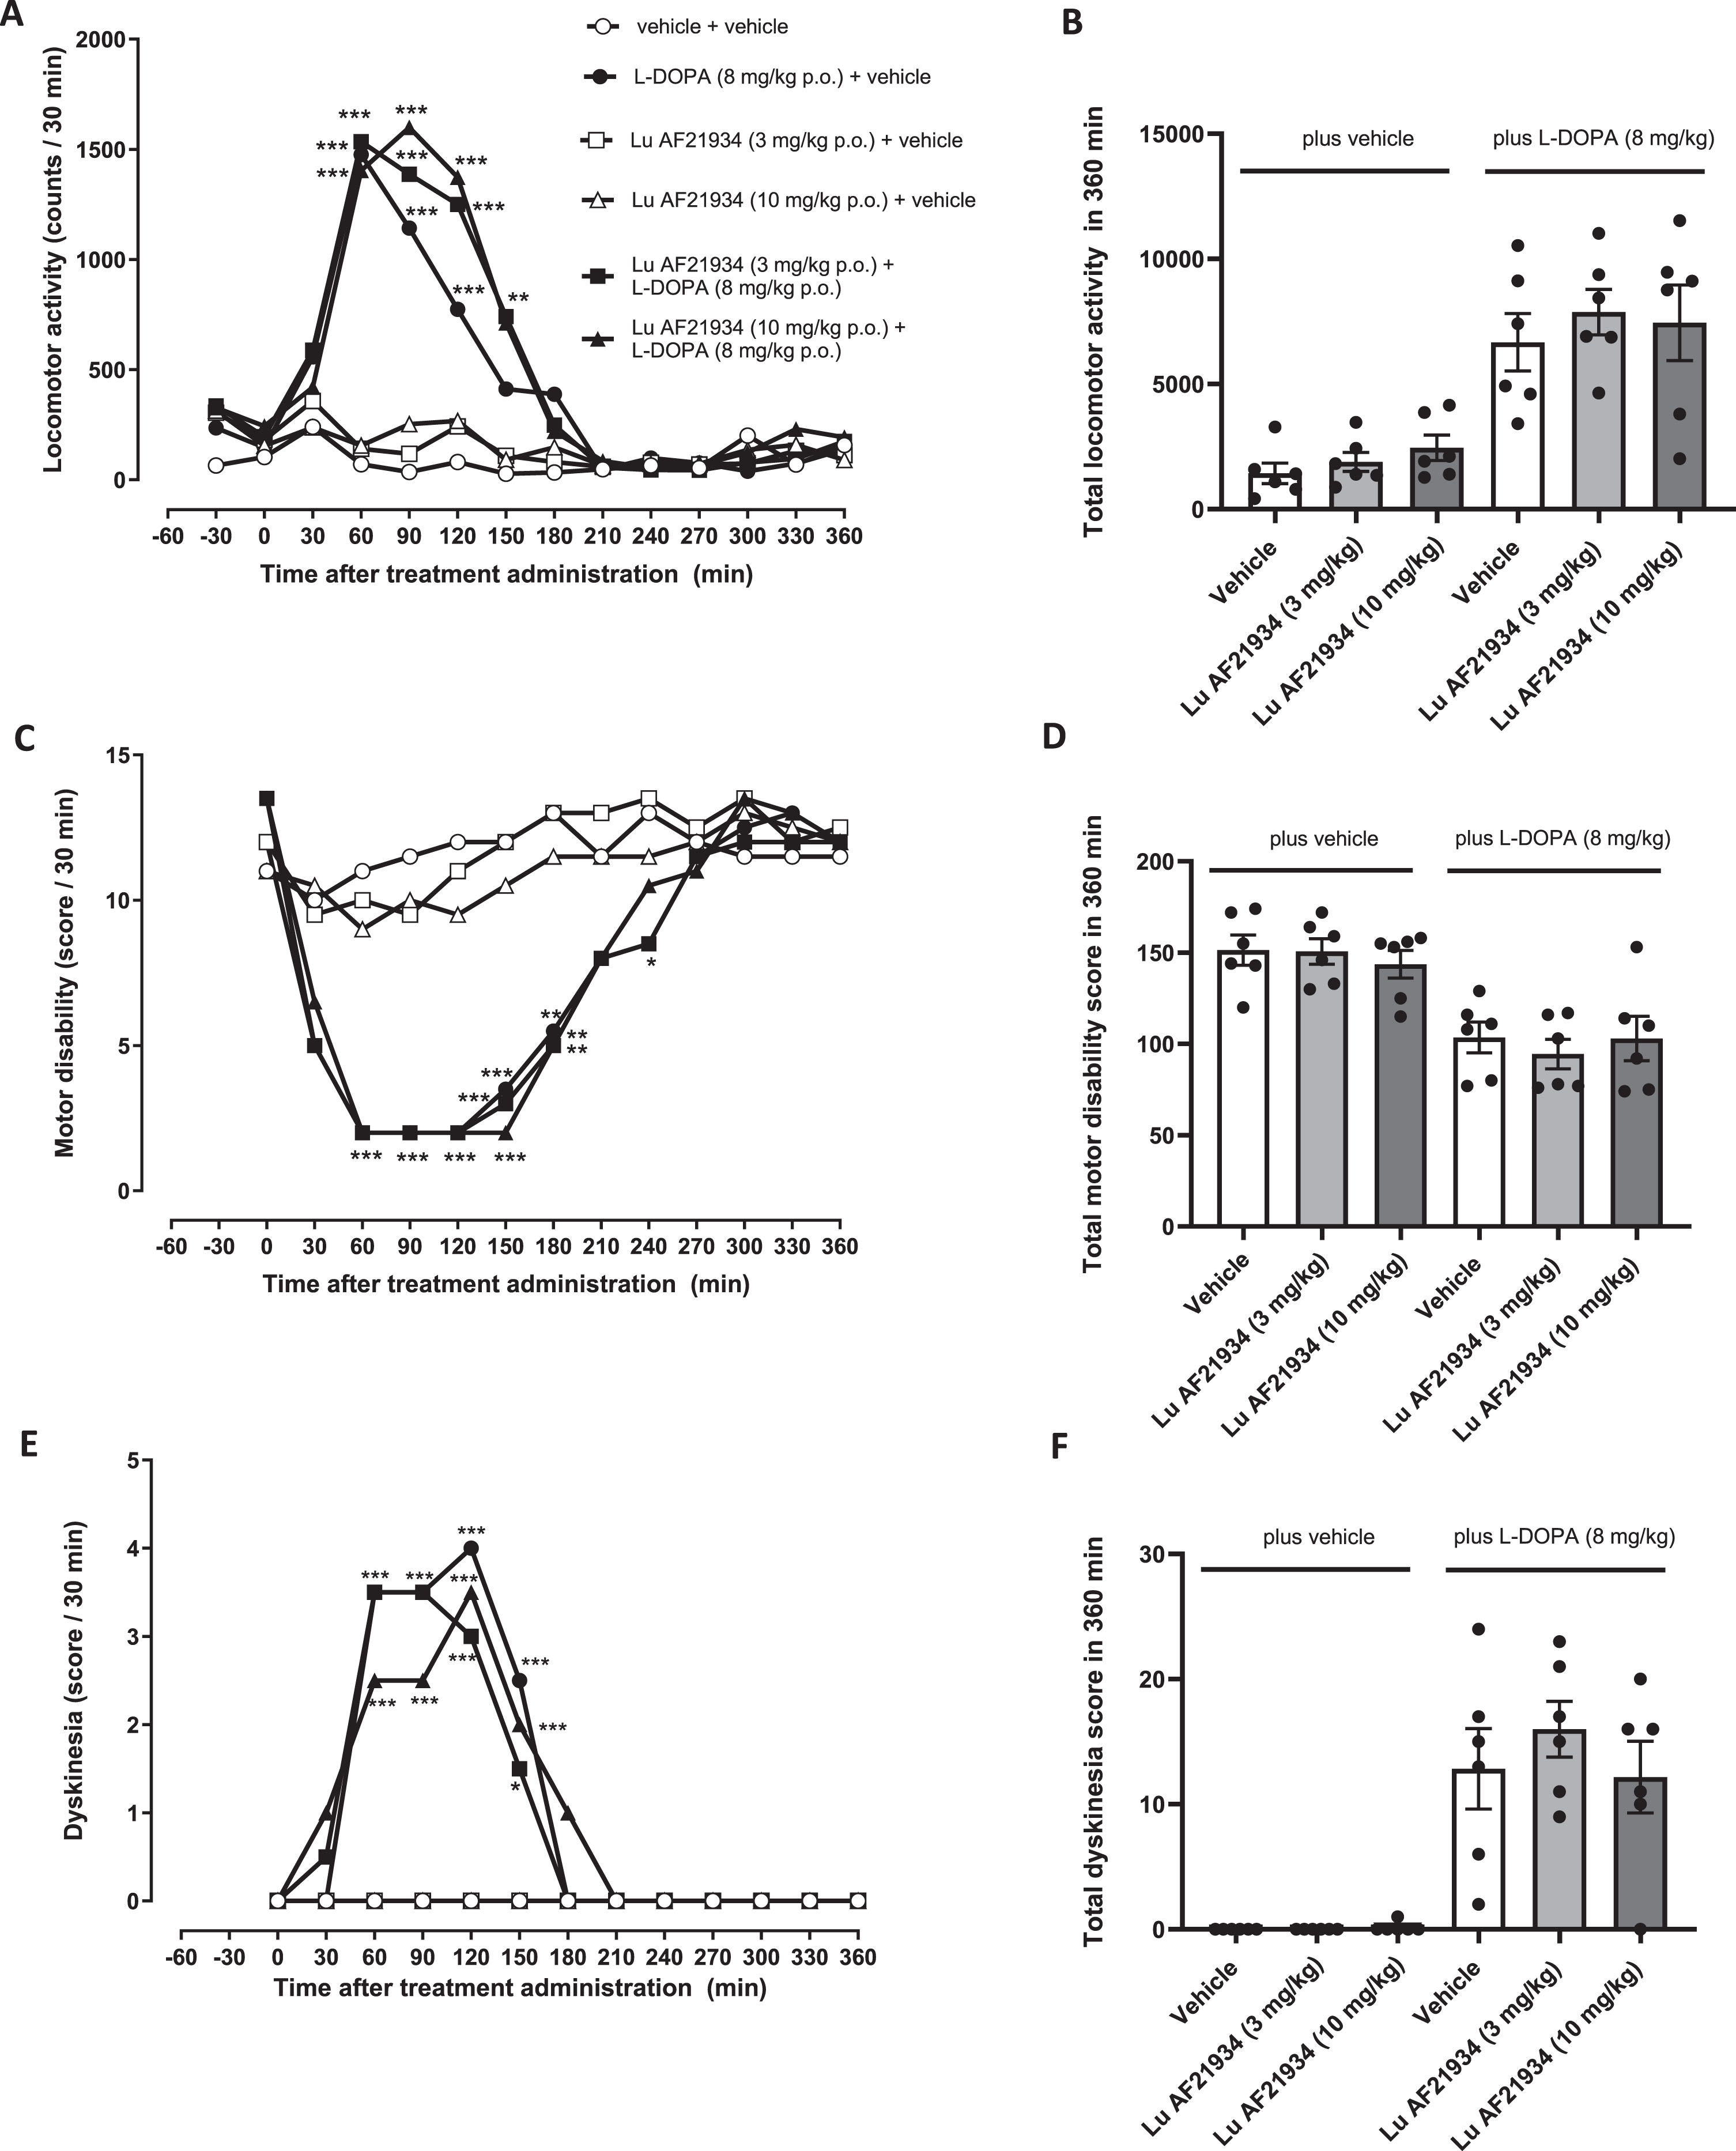 The metabotropic glutamate receptor 4 positive allosteric modulator, Lu AF21934 fails to reverse established L-DOPA-induced dyskinesia in MPTP-treated marmosets. (A,B) Locomotor activity, (C,D) Motor disability scores and (E,F) Dyskinesia scores are shown for a 6 h period post treatment with vehicle or Lu AF21934 (3 and 10 mg/kg po) in combination with vehicle or L-DOPA (8 mg/kg + benserazide (10 mg/kg) p.o.). Left panels show scores per 30-min interval over the 6 h period. Data are medians (n = 6). Data were analyzed by two-way RM ANOVA with Bonferroni post-hoc test. ***p < 0.001, **p < 0.01, and *p < 0.05 versus ‘vehicle + vehicle’ treatment. Right panels show total scores over the entire 6-h period. Data are mean±S.E.M (n = 6), with individual data points displayed additionally. Data within ‘plus vehicle’ and within ‘plus L-DOPA’ groups were analyzed by one-way ANOVA with Dunnett’s post-hoc test (p > 0.05 versus respective vehicle treatment).